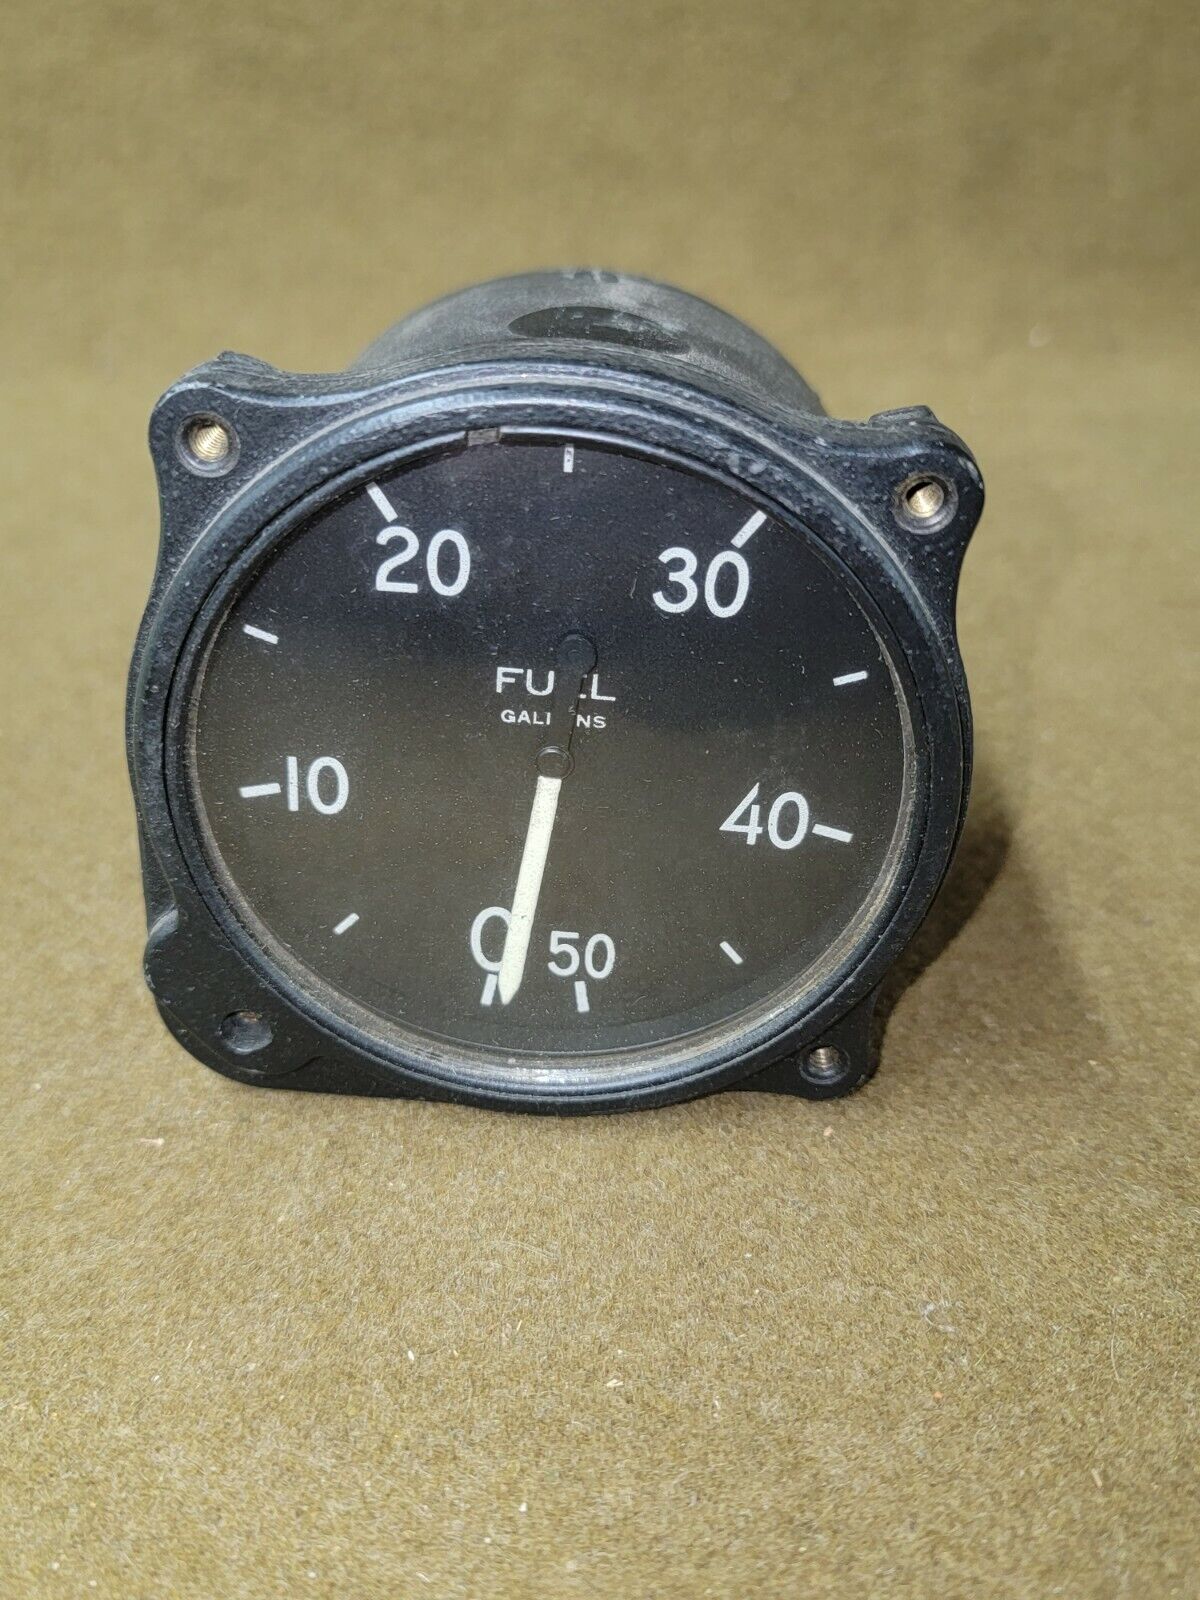 Vintage Type C-3 Fuel Gauge by Sparks-Withington